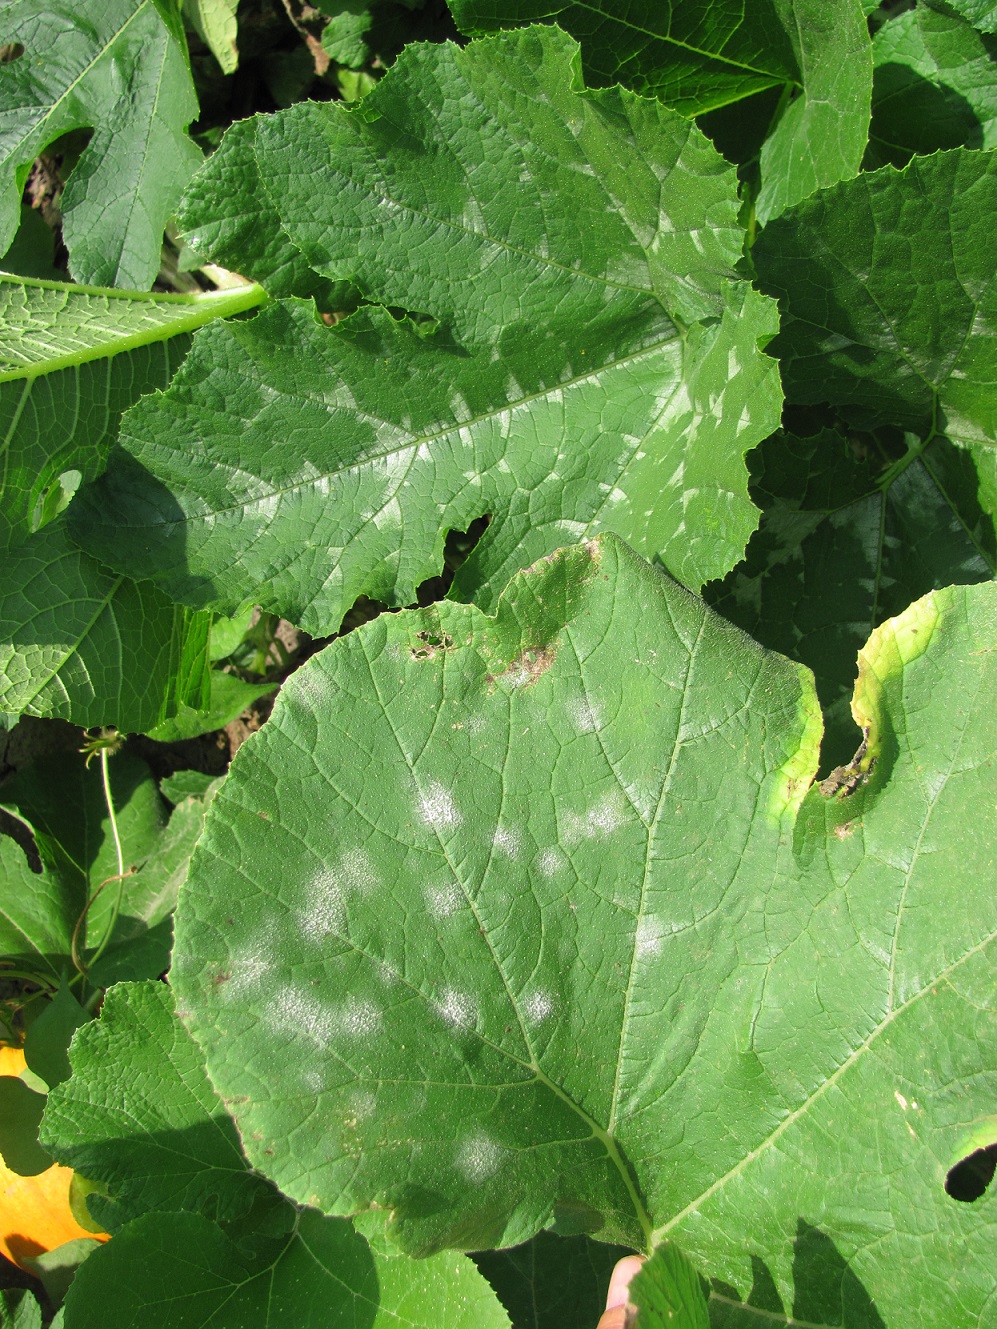 Figure 4. Powdery mildew lesions can be observed on the lower leaf in this photo.  The upper leaf has light colored variegation that are sometimes mistaken for powdery mildew.  